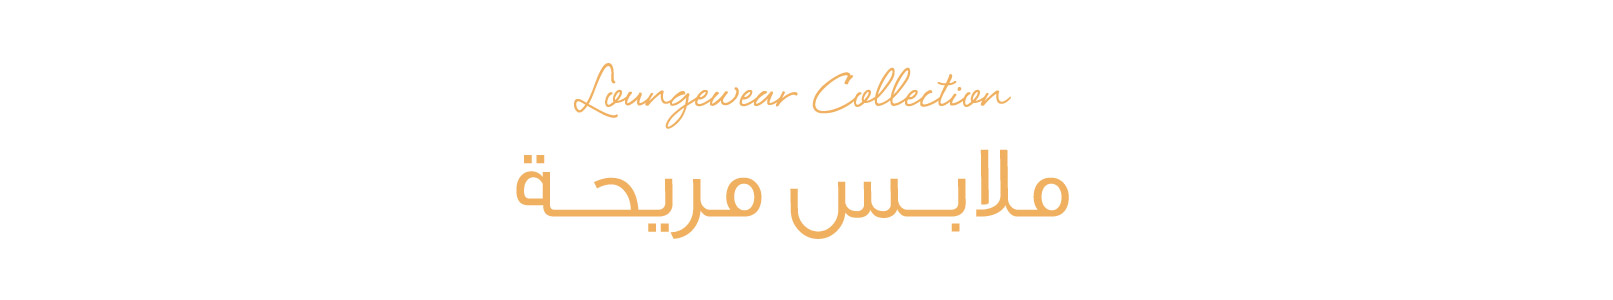 Loungewear collection